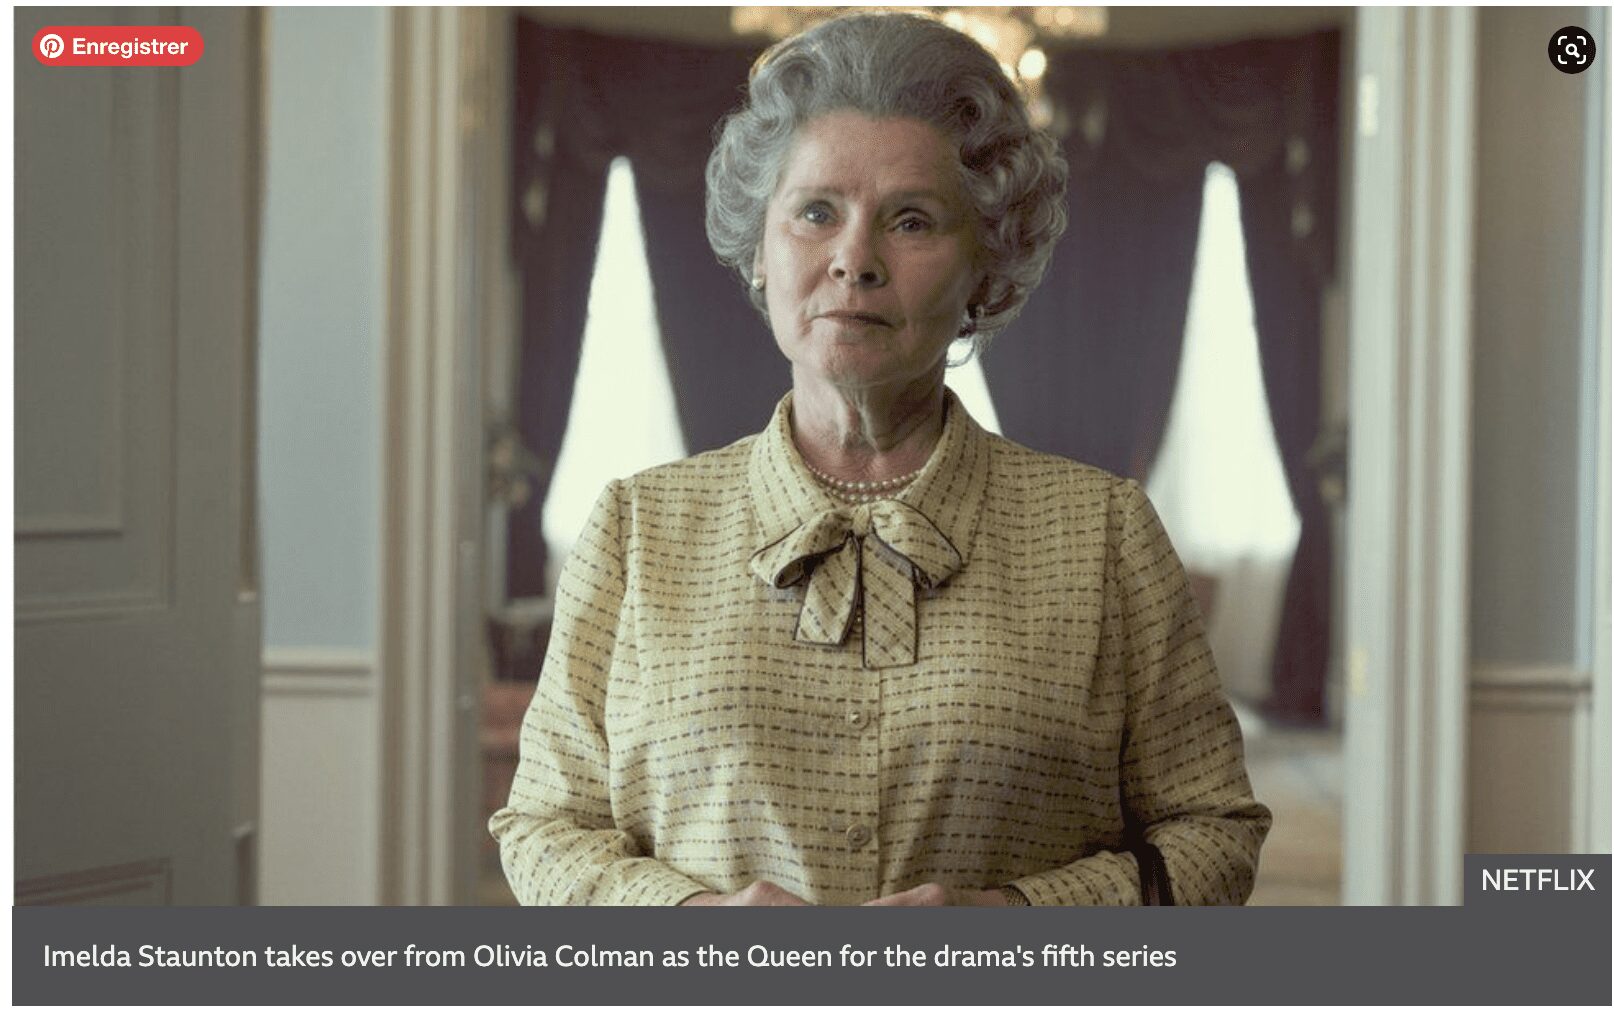 Imelda Staunton pictured as Queen in Netflix’s The Crown for first time